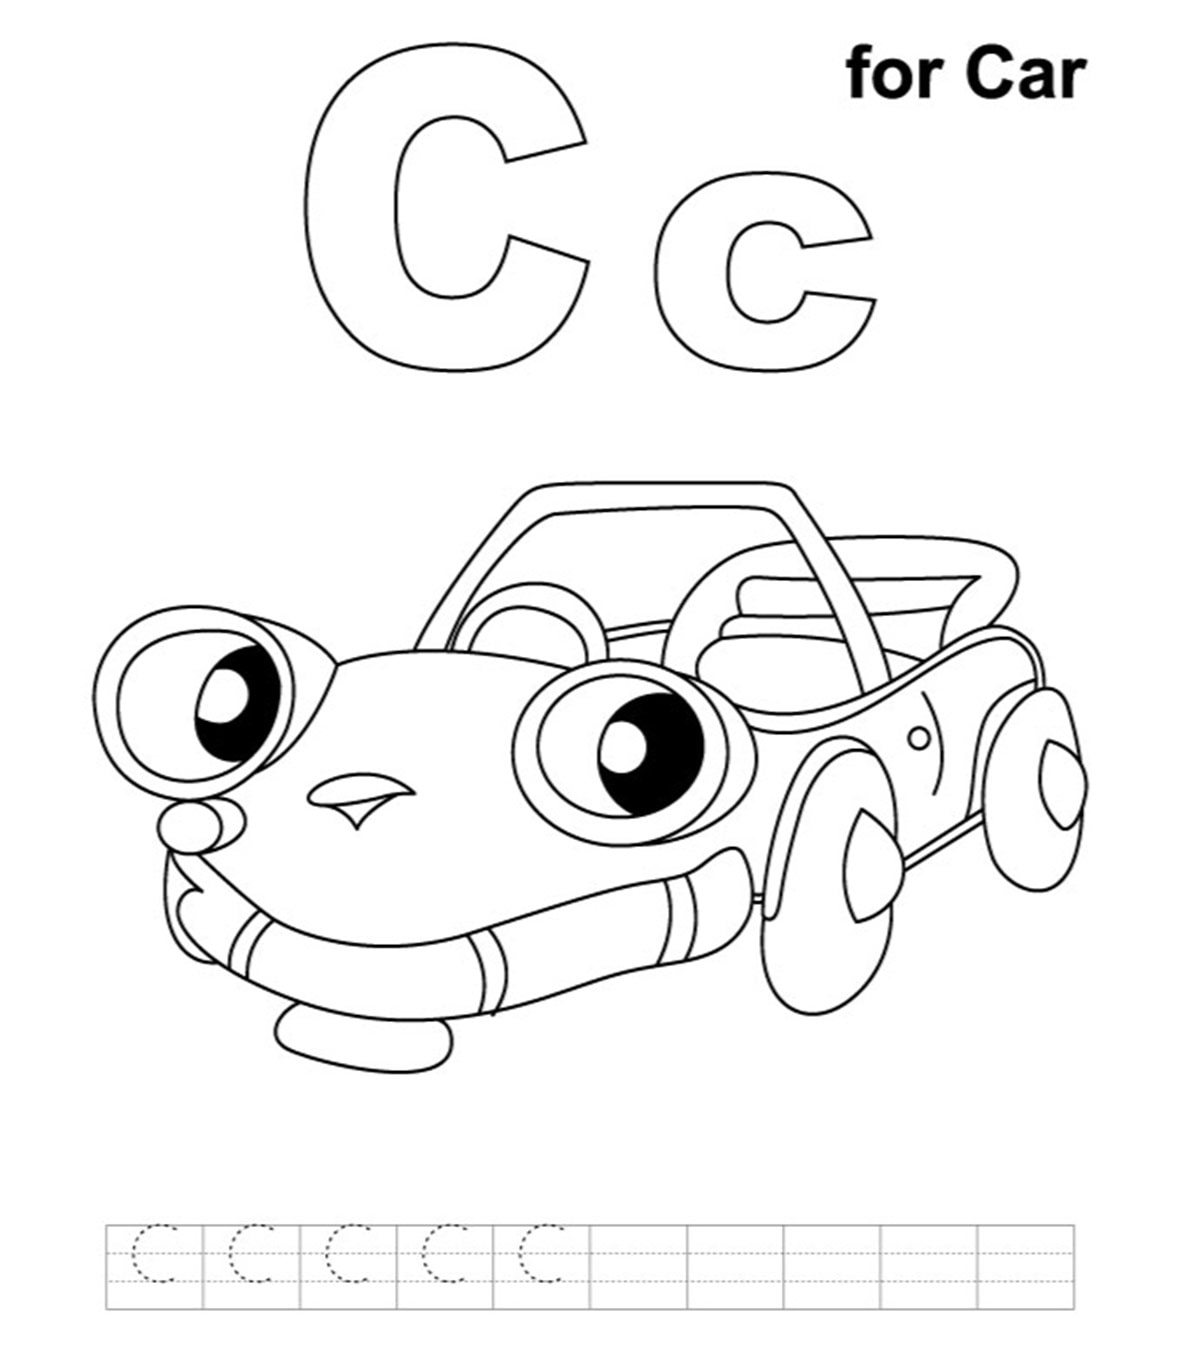 Vehicles Coloring Pages - MomJunction